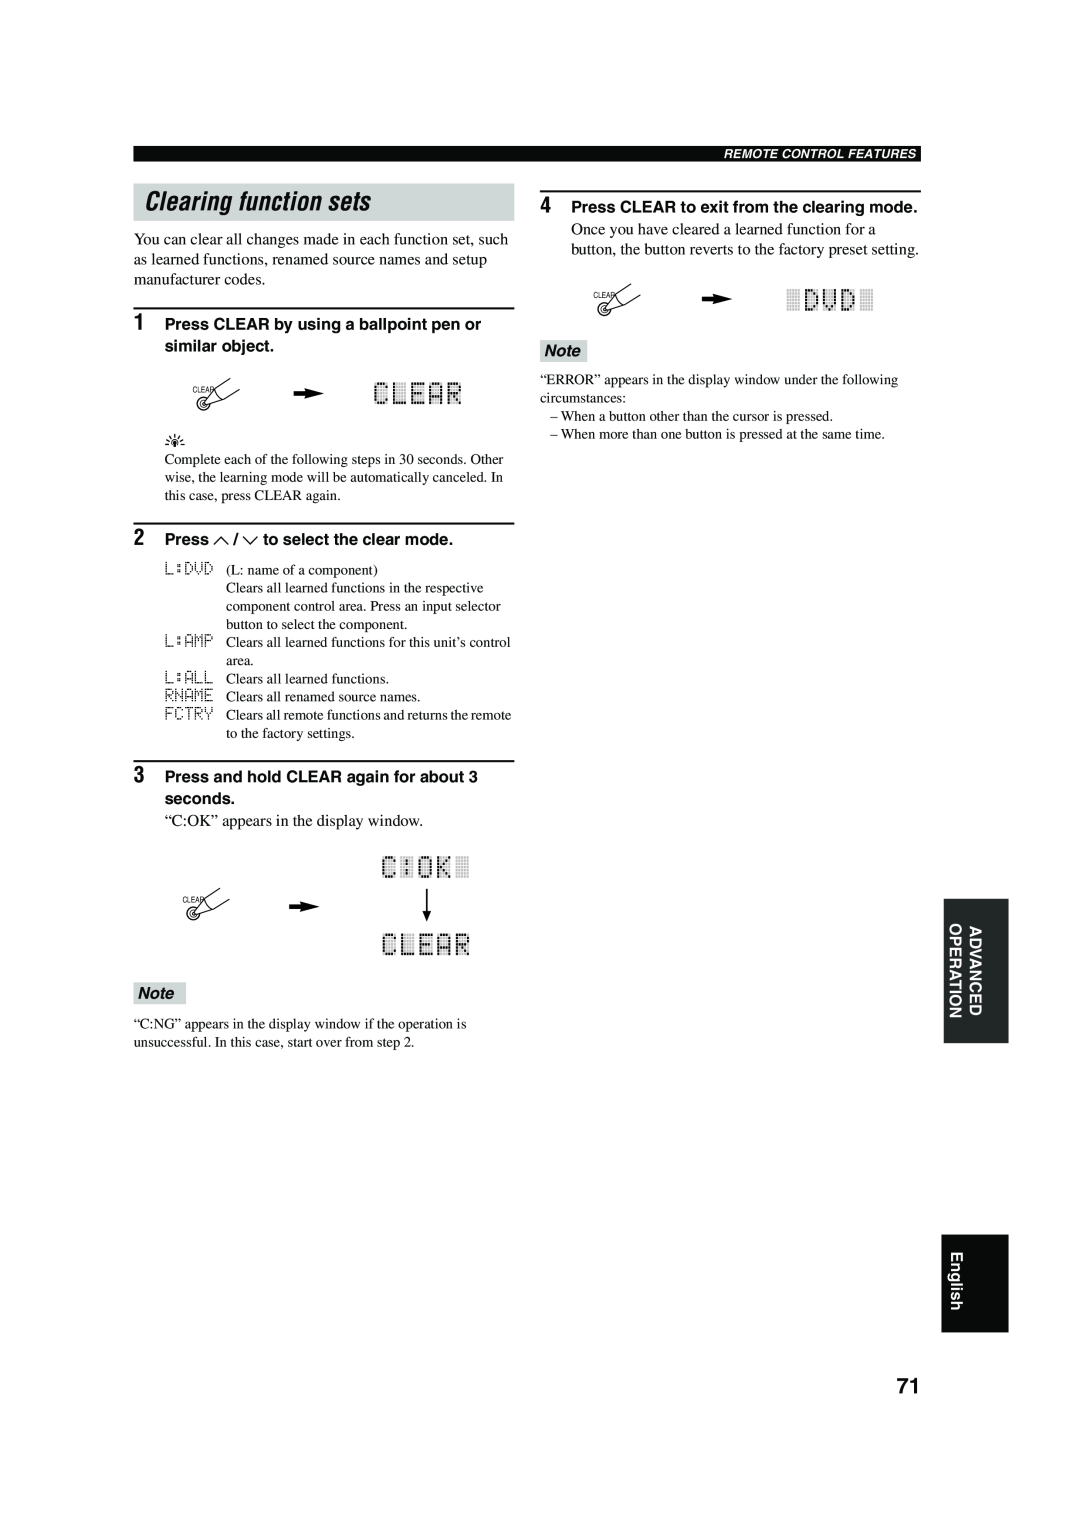 Yamaha DSP-AX750SE owner manual Clearing function sets, 2Press u / d to select the clear mode 